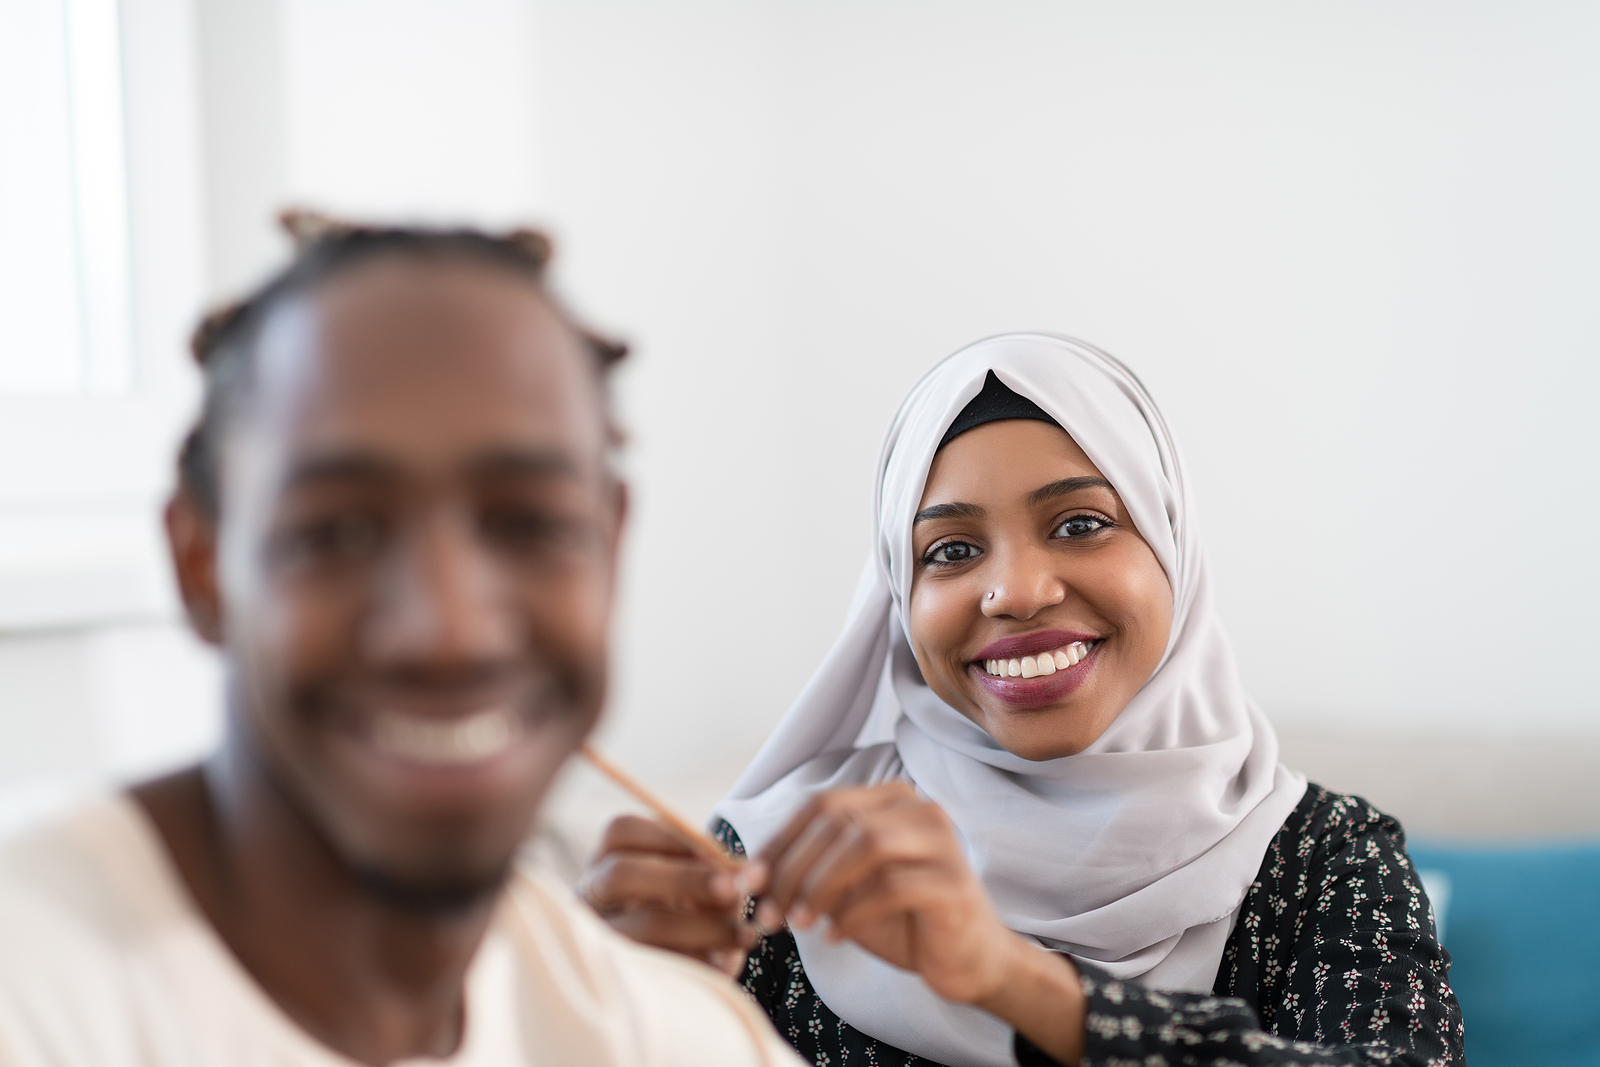 A woman in hijab, smiling and braiding a man's hair while he is looking into the camera as well and smiling.